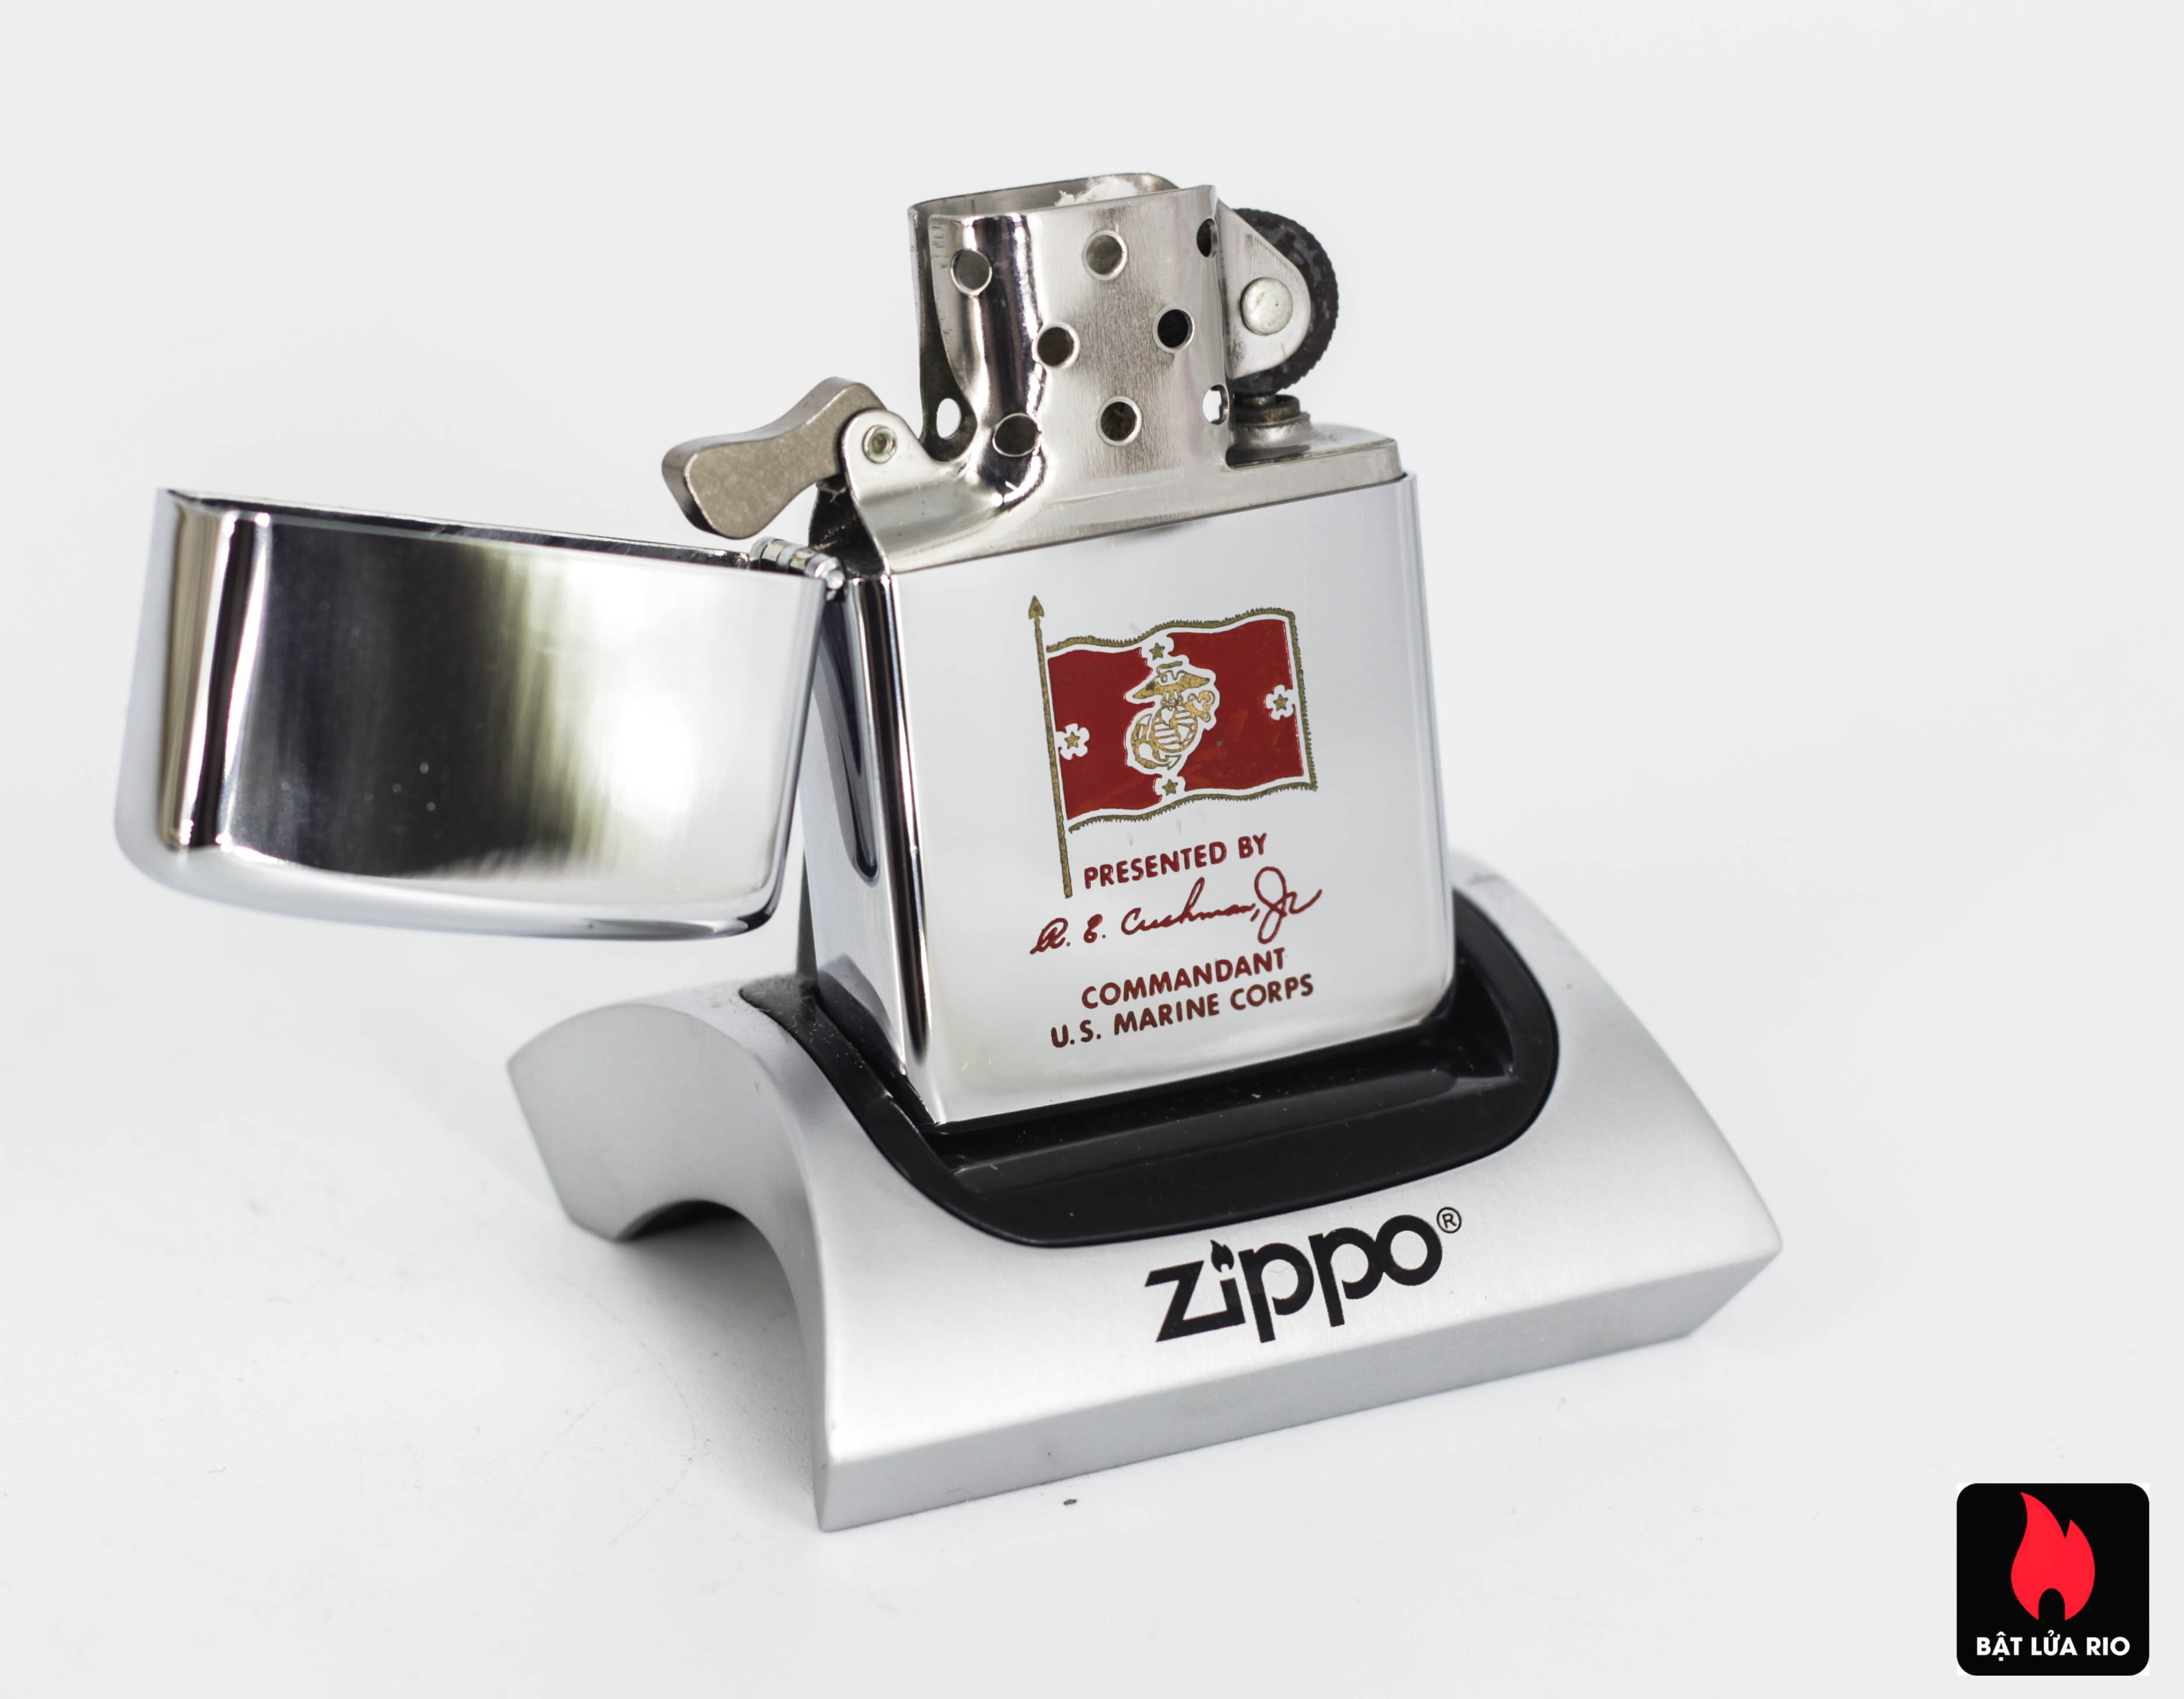 ZIPPO XƯA 1971 – PRESENTED BY COMMANDANT US MARINE CORPS